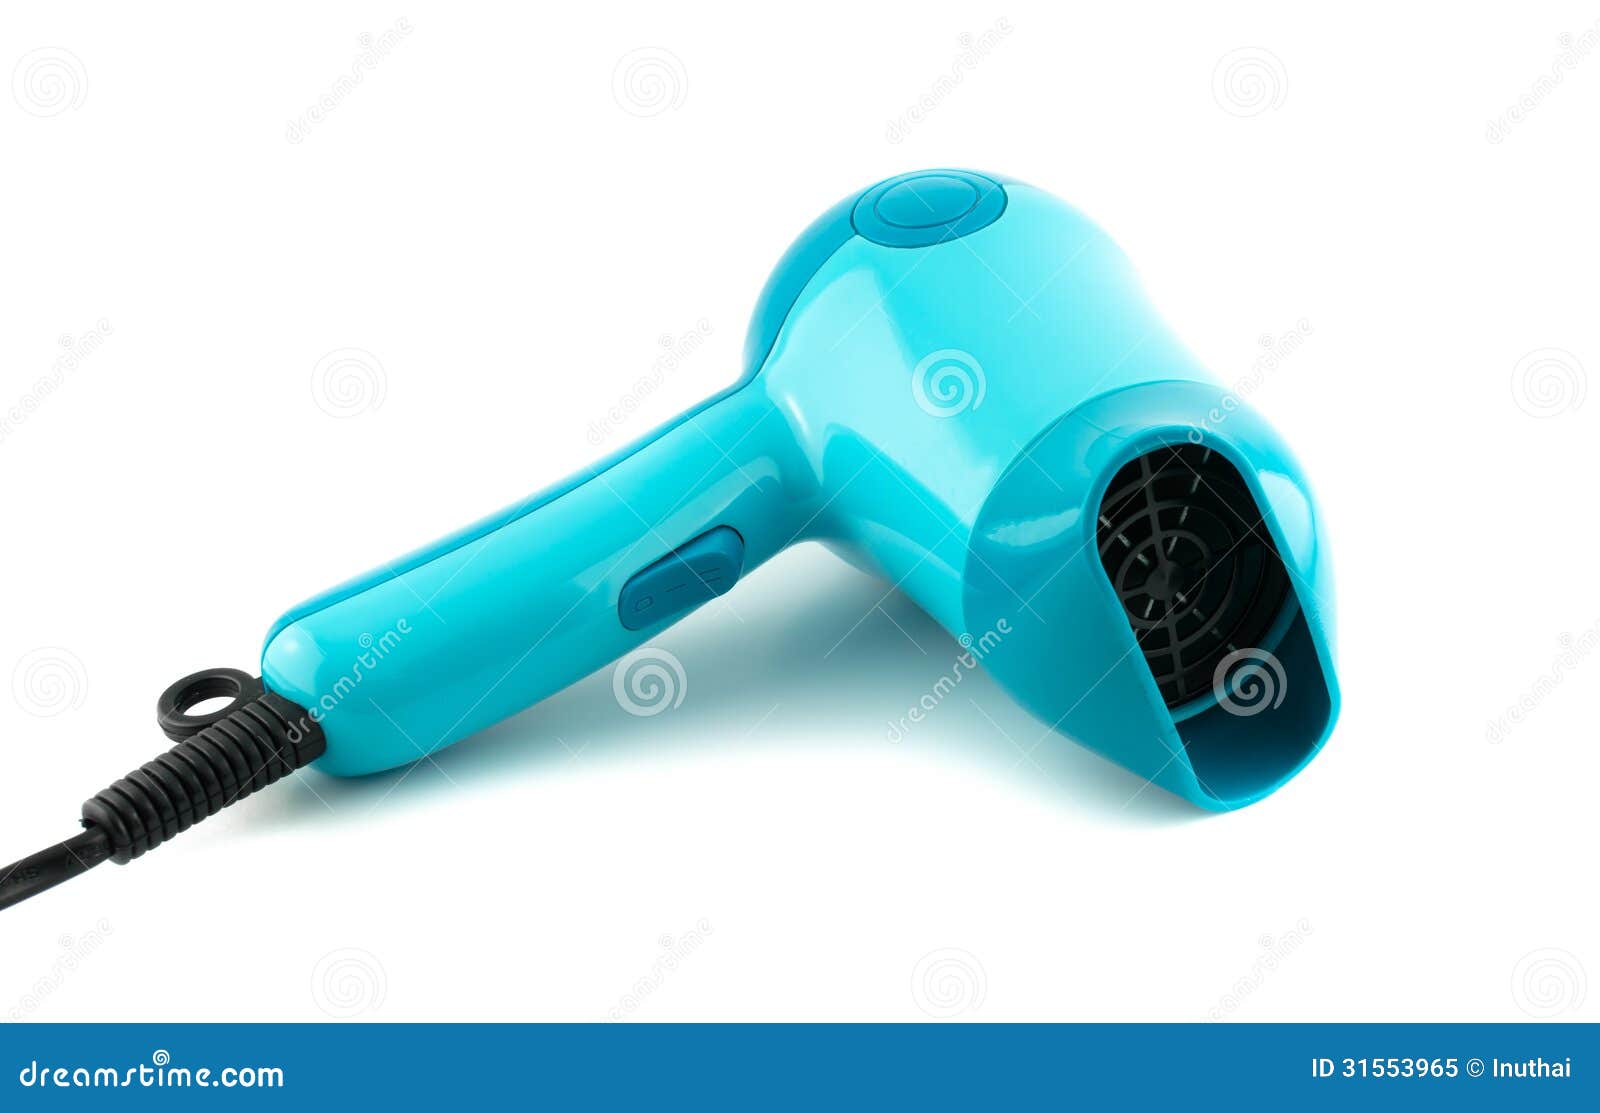 blue and white hair dryer